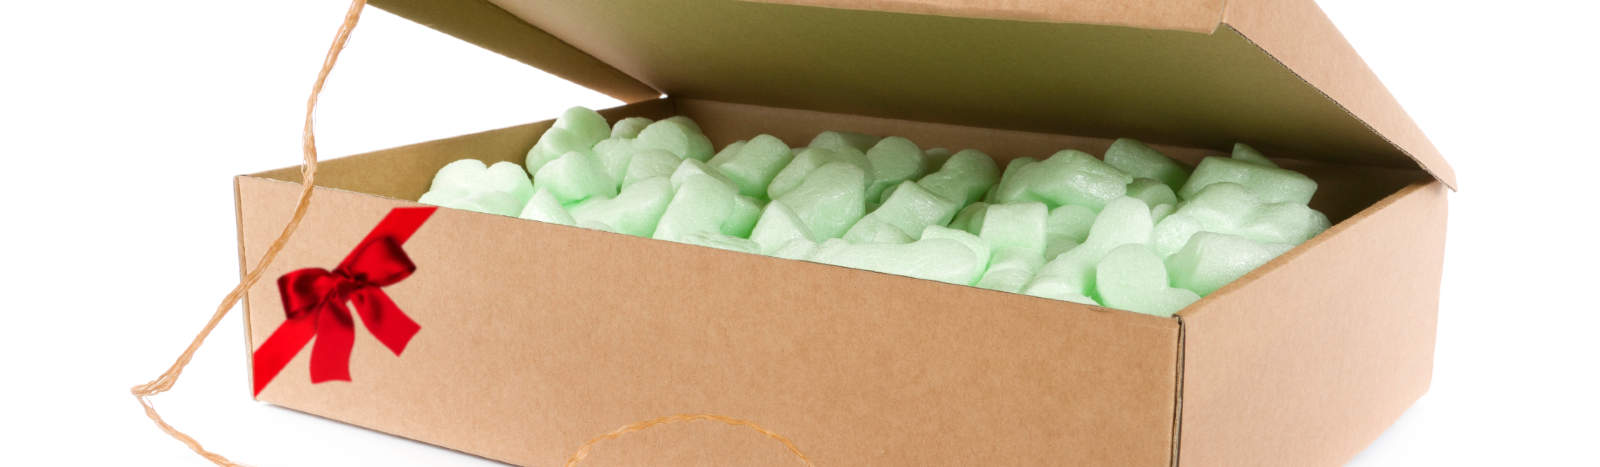 Ho-Ho-Holiday Packaging… Can It Be Recycled?